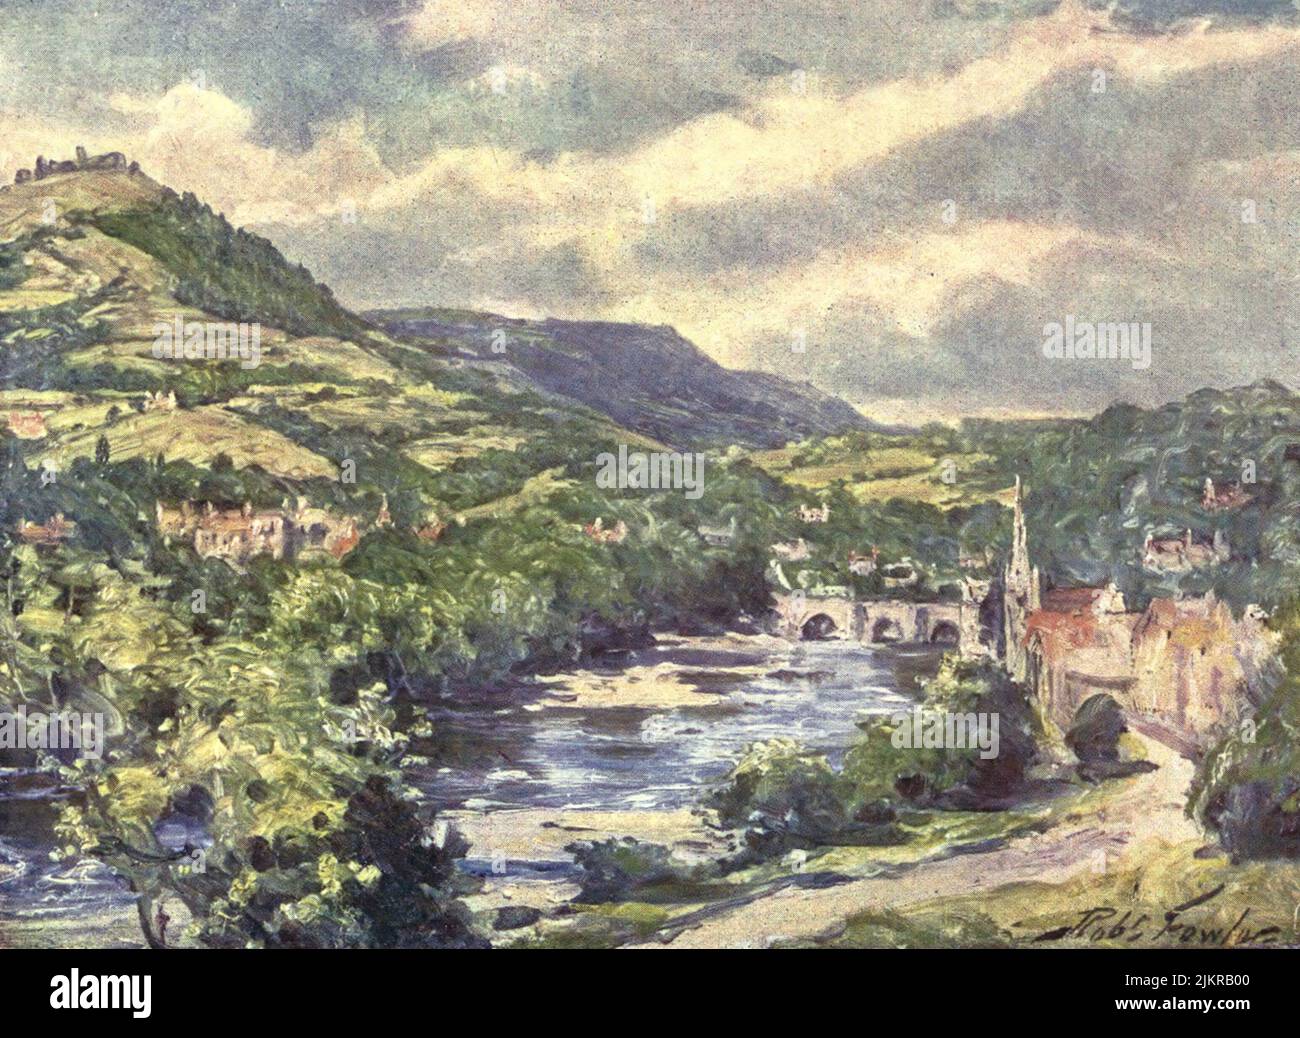 View of Llangollen watercolour painting by Robert Fowler from the book ' BEAUTIFUL WALES ' Described by Edward Thomas Publication date 1905 Publisher London, A. & C. Black Stock Photo